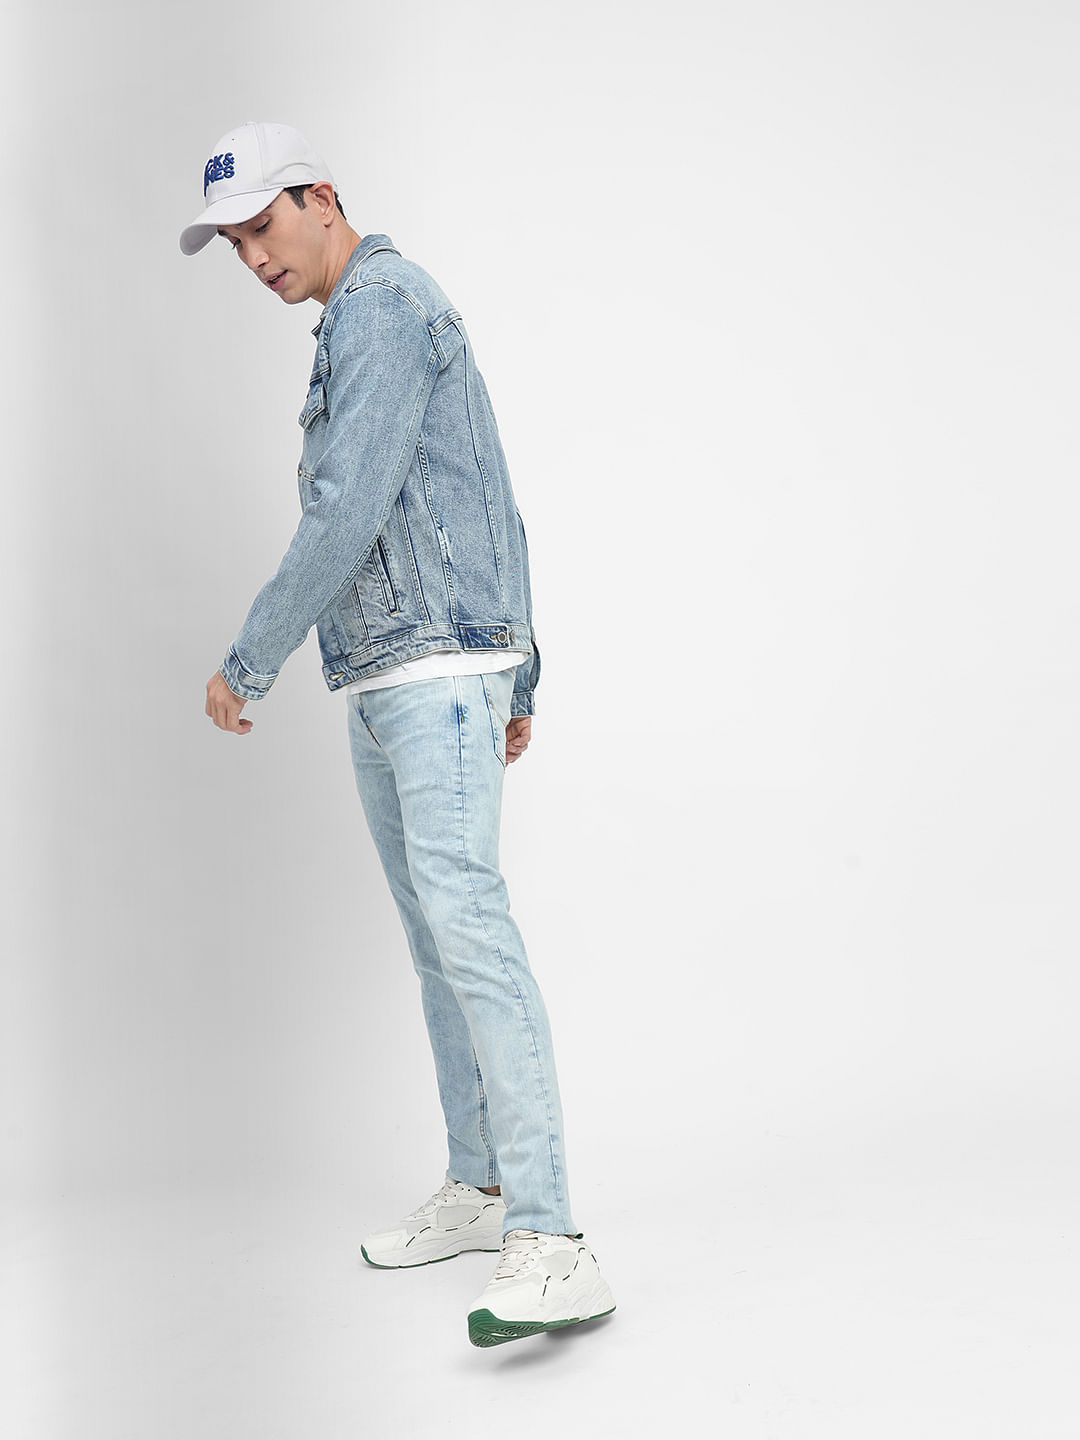 Light Wash Denim: Elevate Your Summer Style with a Timeless Classic –  Royalty For me